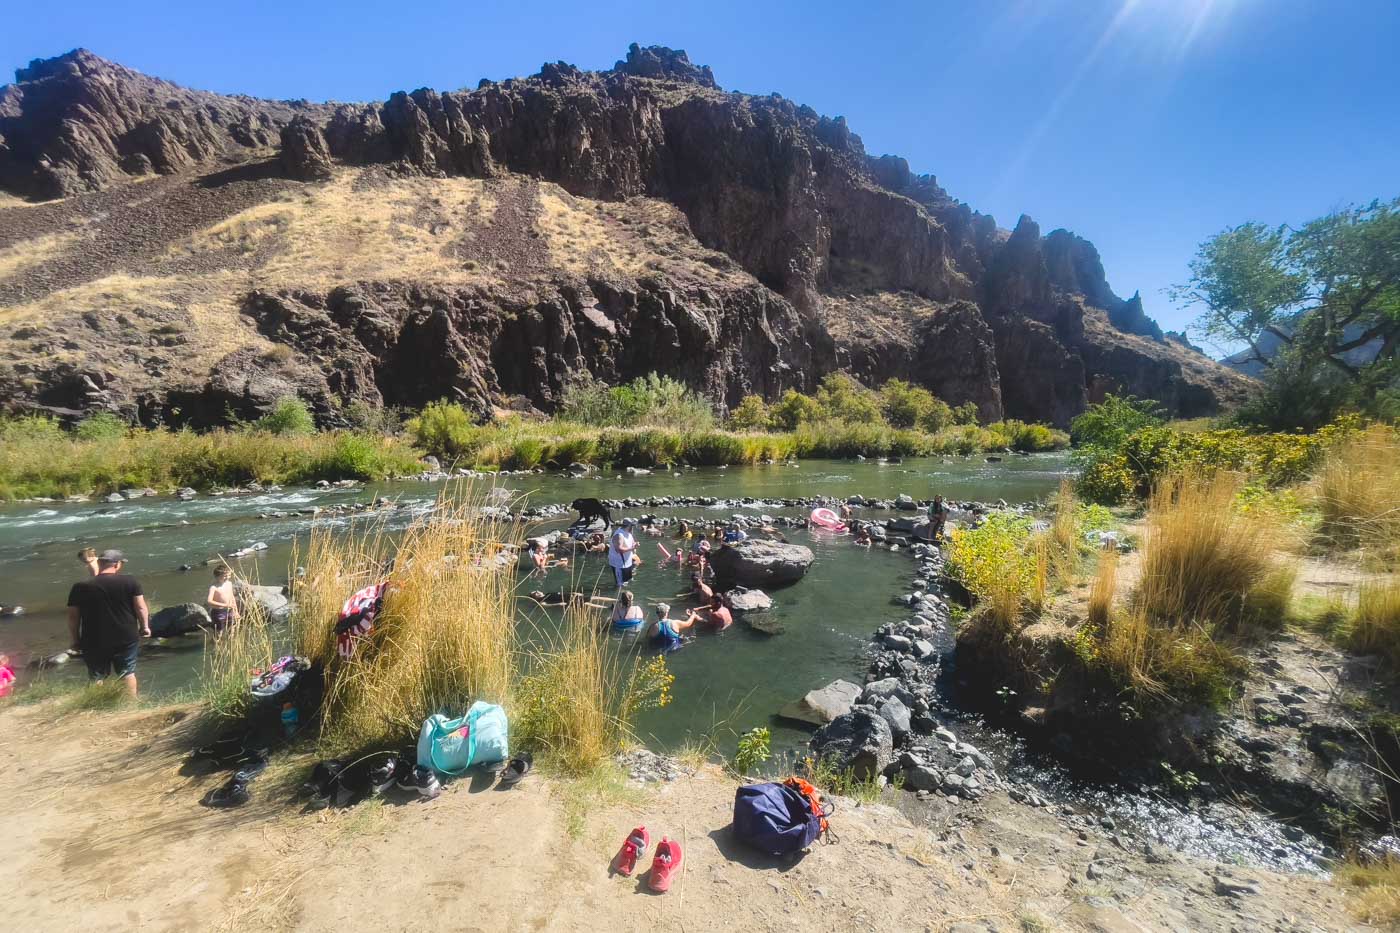 Groups of people bathing in Snively Hot Springs surrounded by bushes, trees and cliffs.